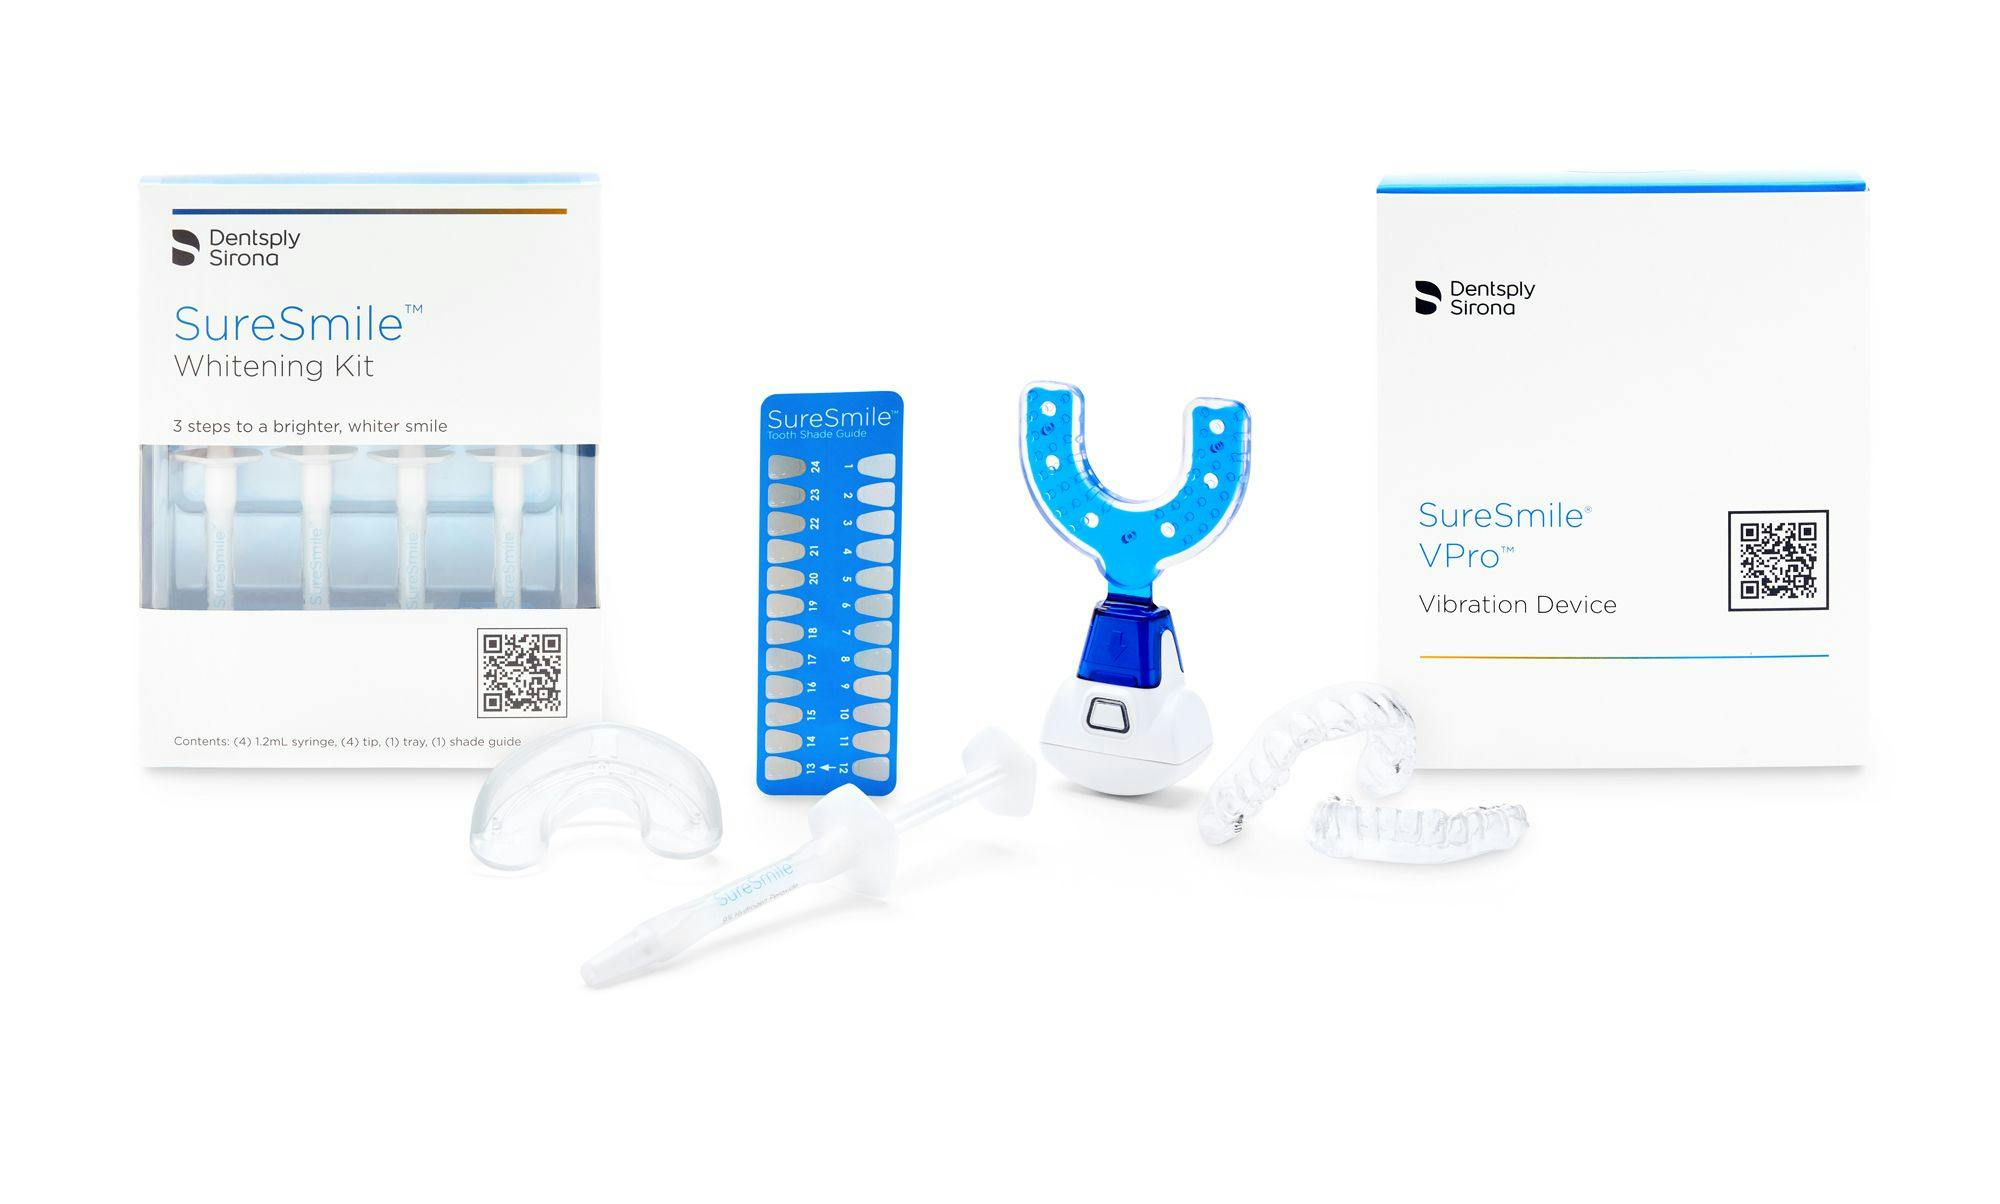 Dentsply Sirona Introduces New SureSmile VPro, Retainer, and Teeth Whitening Solutions